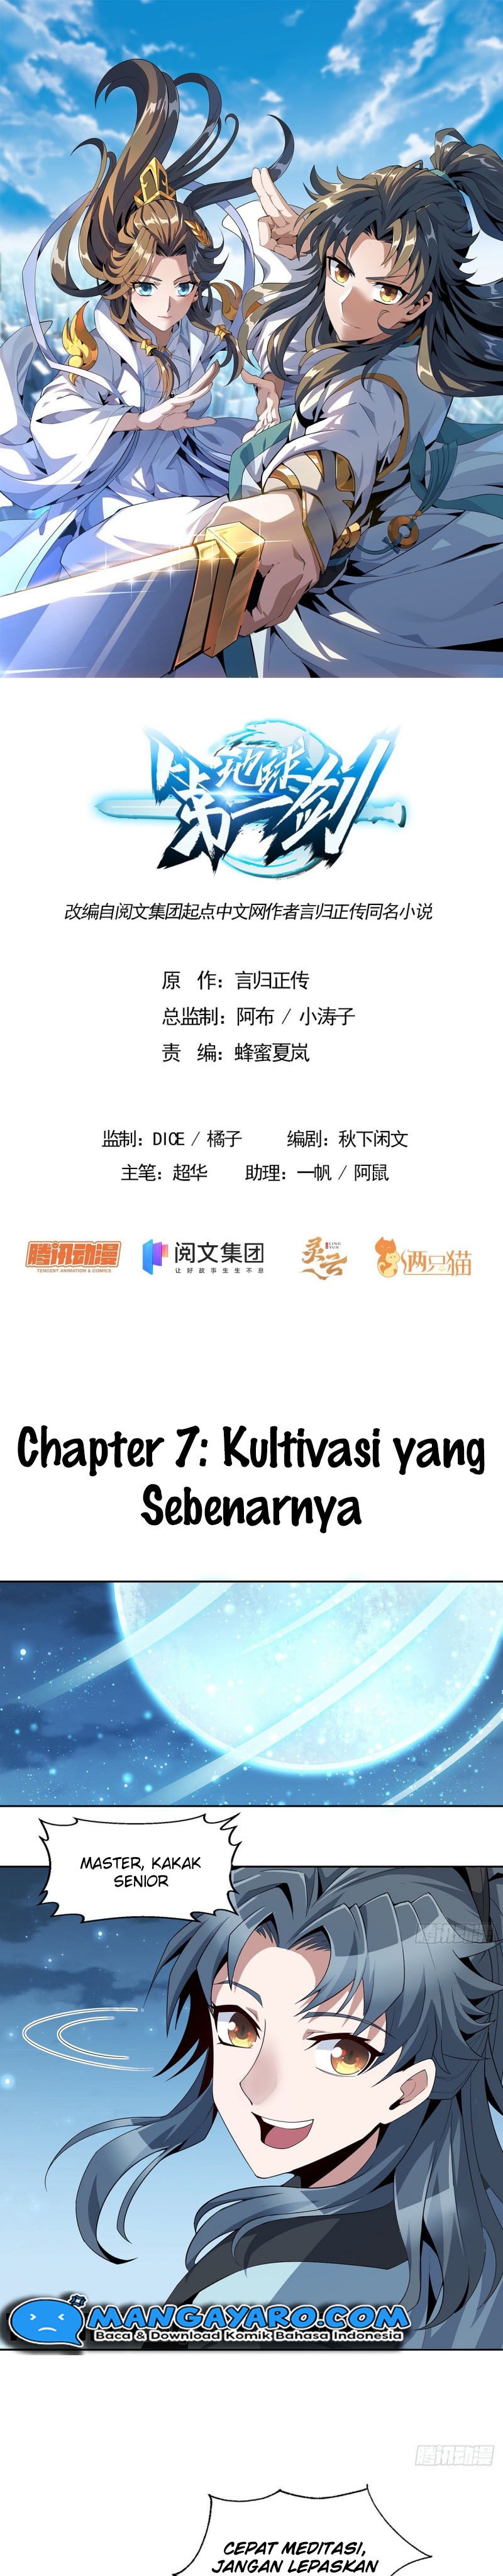 The First Sword of Earth Chapter 07